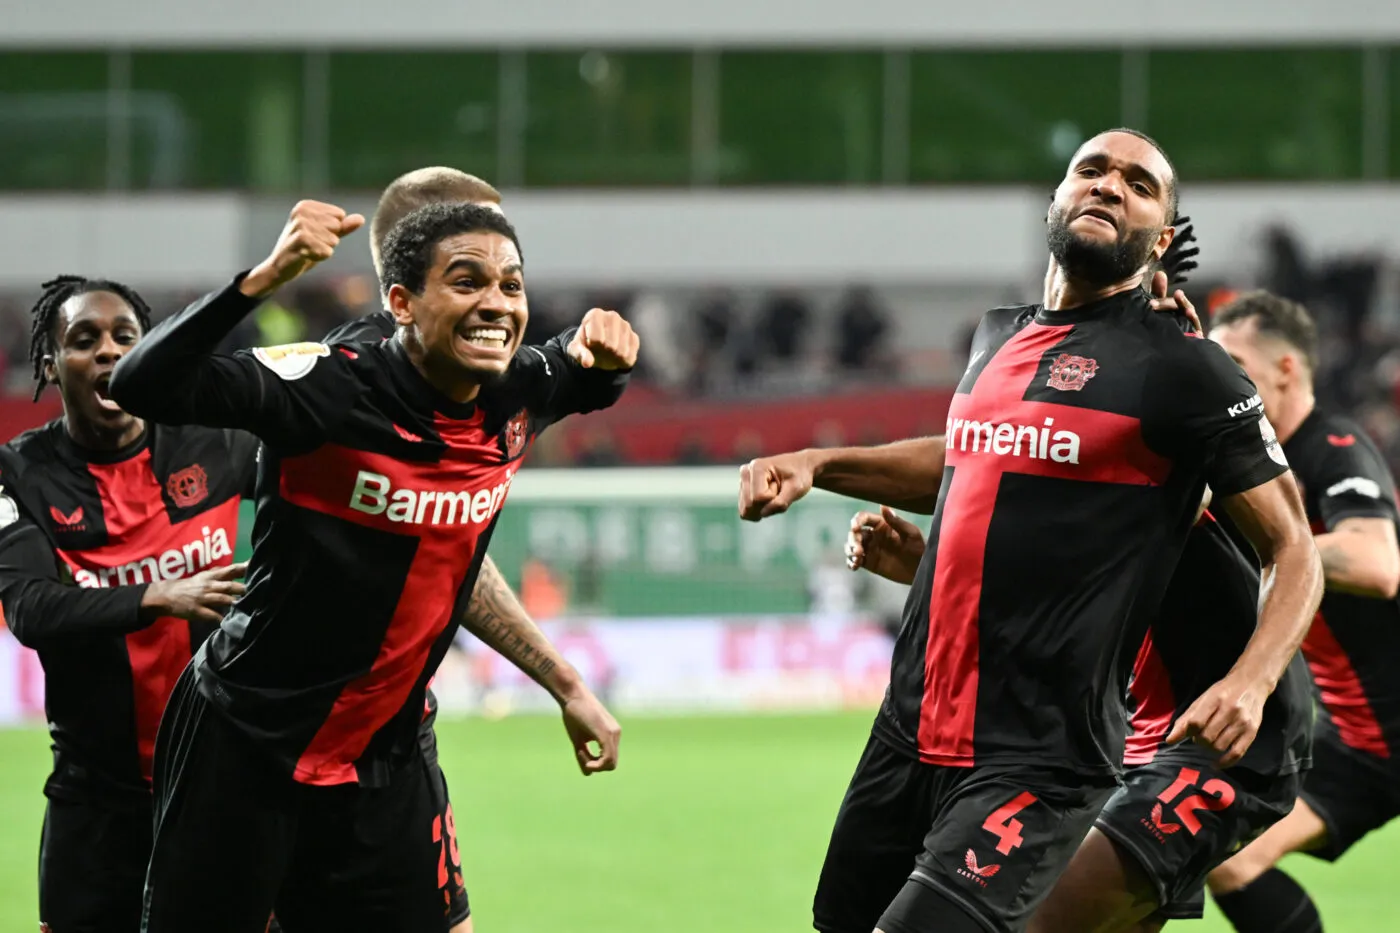 06 February 2024, North Rhine-Westphalia, Leverkusen: Soccer: DFB Cup, Bayer Leverkusen - VfB Stuttgart, quarter-final in the BayArena, Leverkusen's Jonathan Tah (r) celebrates with Amine Adli (2nd from left) after his goal to make it 3:2. IMPORTANT NOTE: In accordance with the regulations of the DFL German Football League and the DFB German Football Association, it is prohibited to use or have used photographs taken in the stadium and/or of the match in the form of sequential images and/or video-like photo series. Photo: Federico Gambarini/dpa - Photo by Icon Sport